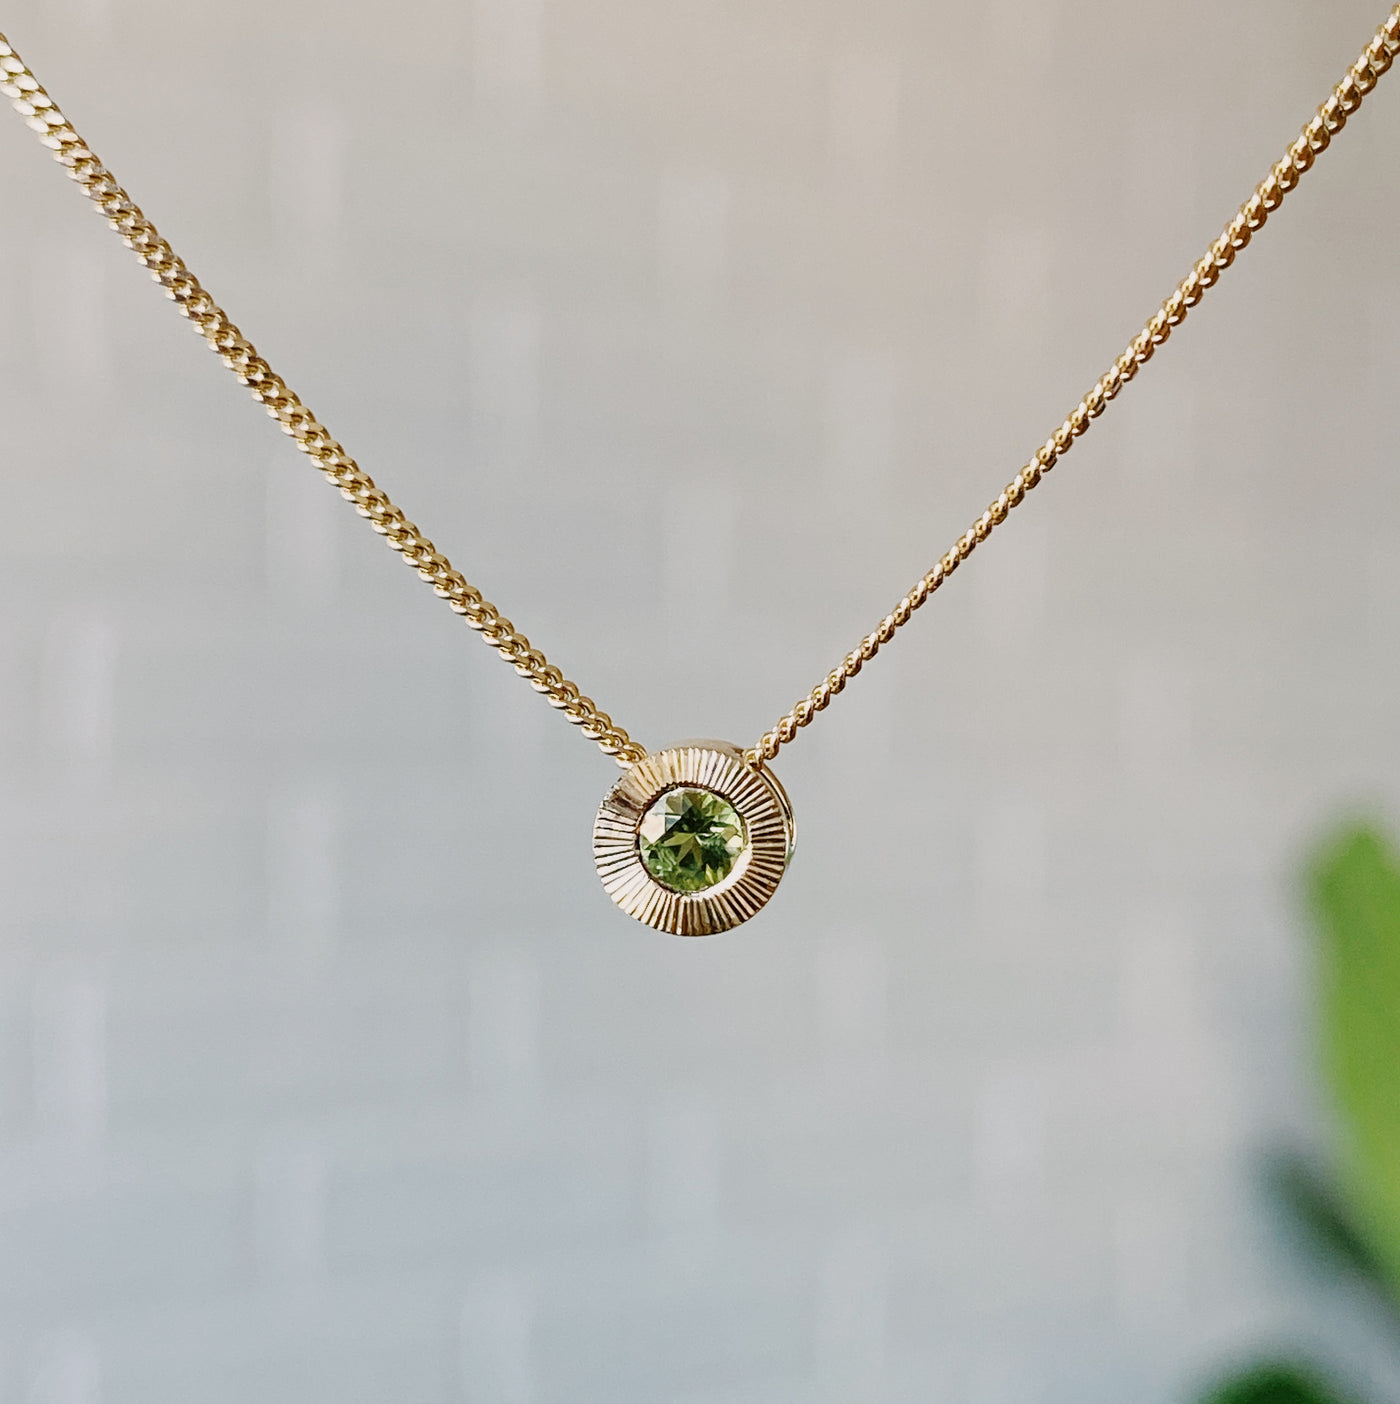 Small Aurora Birthstone Necklace in 14k Yellow Gold